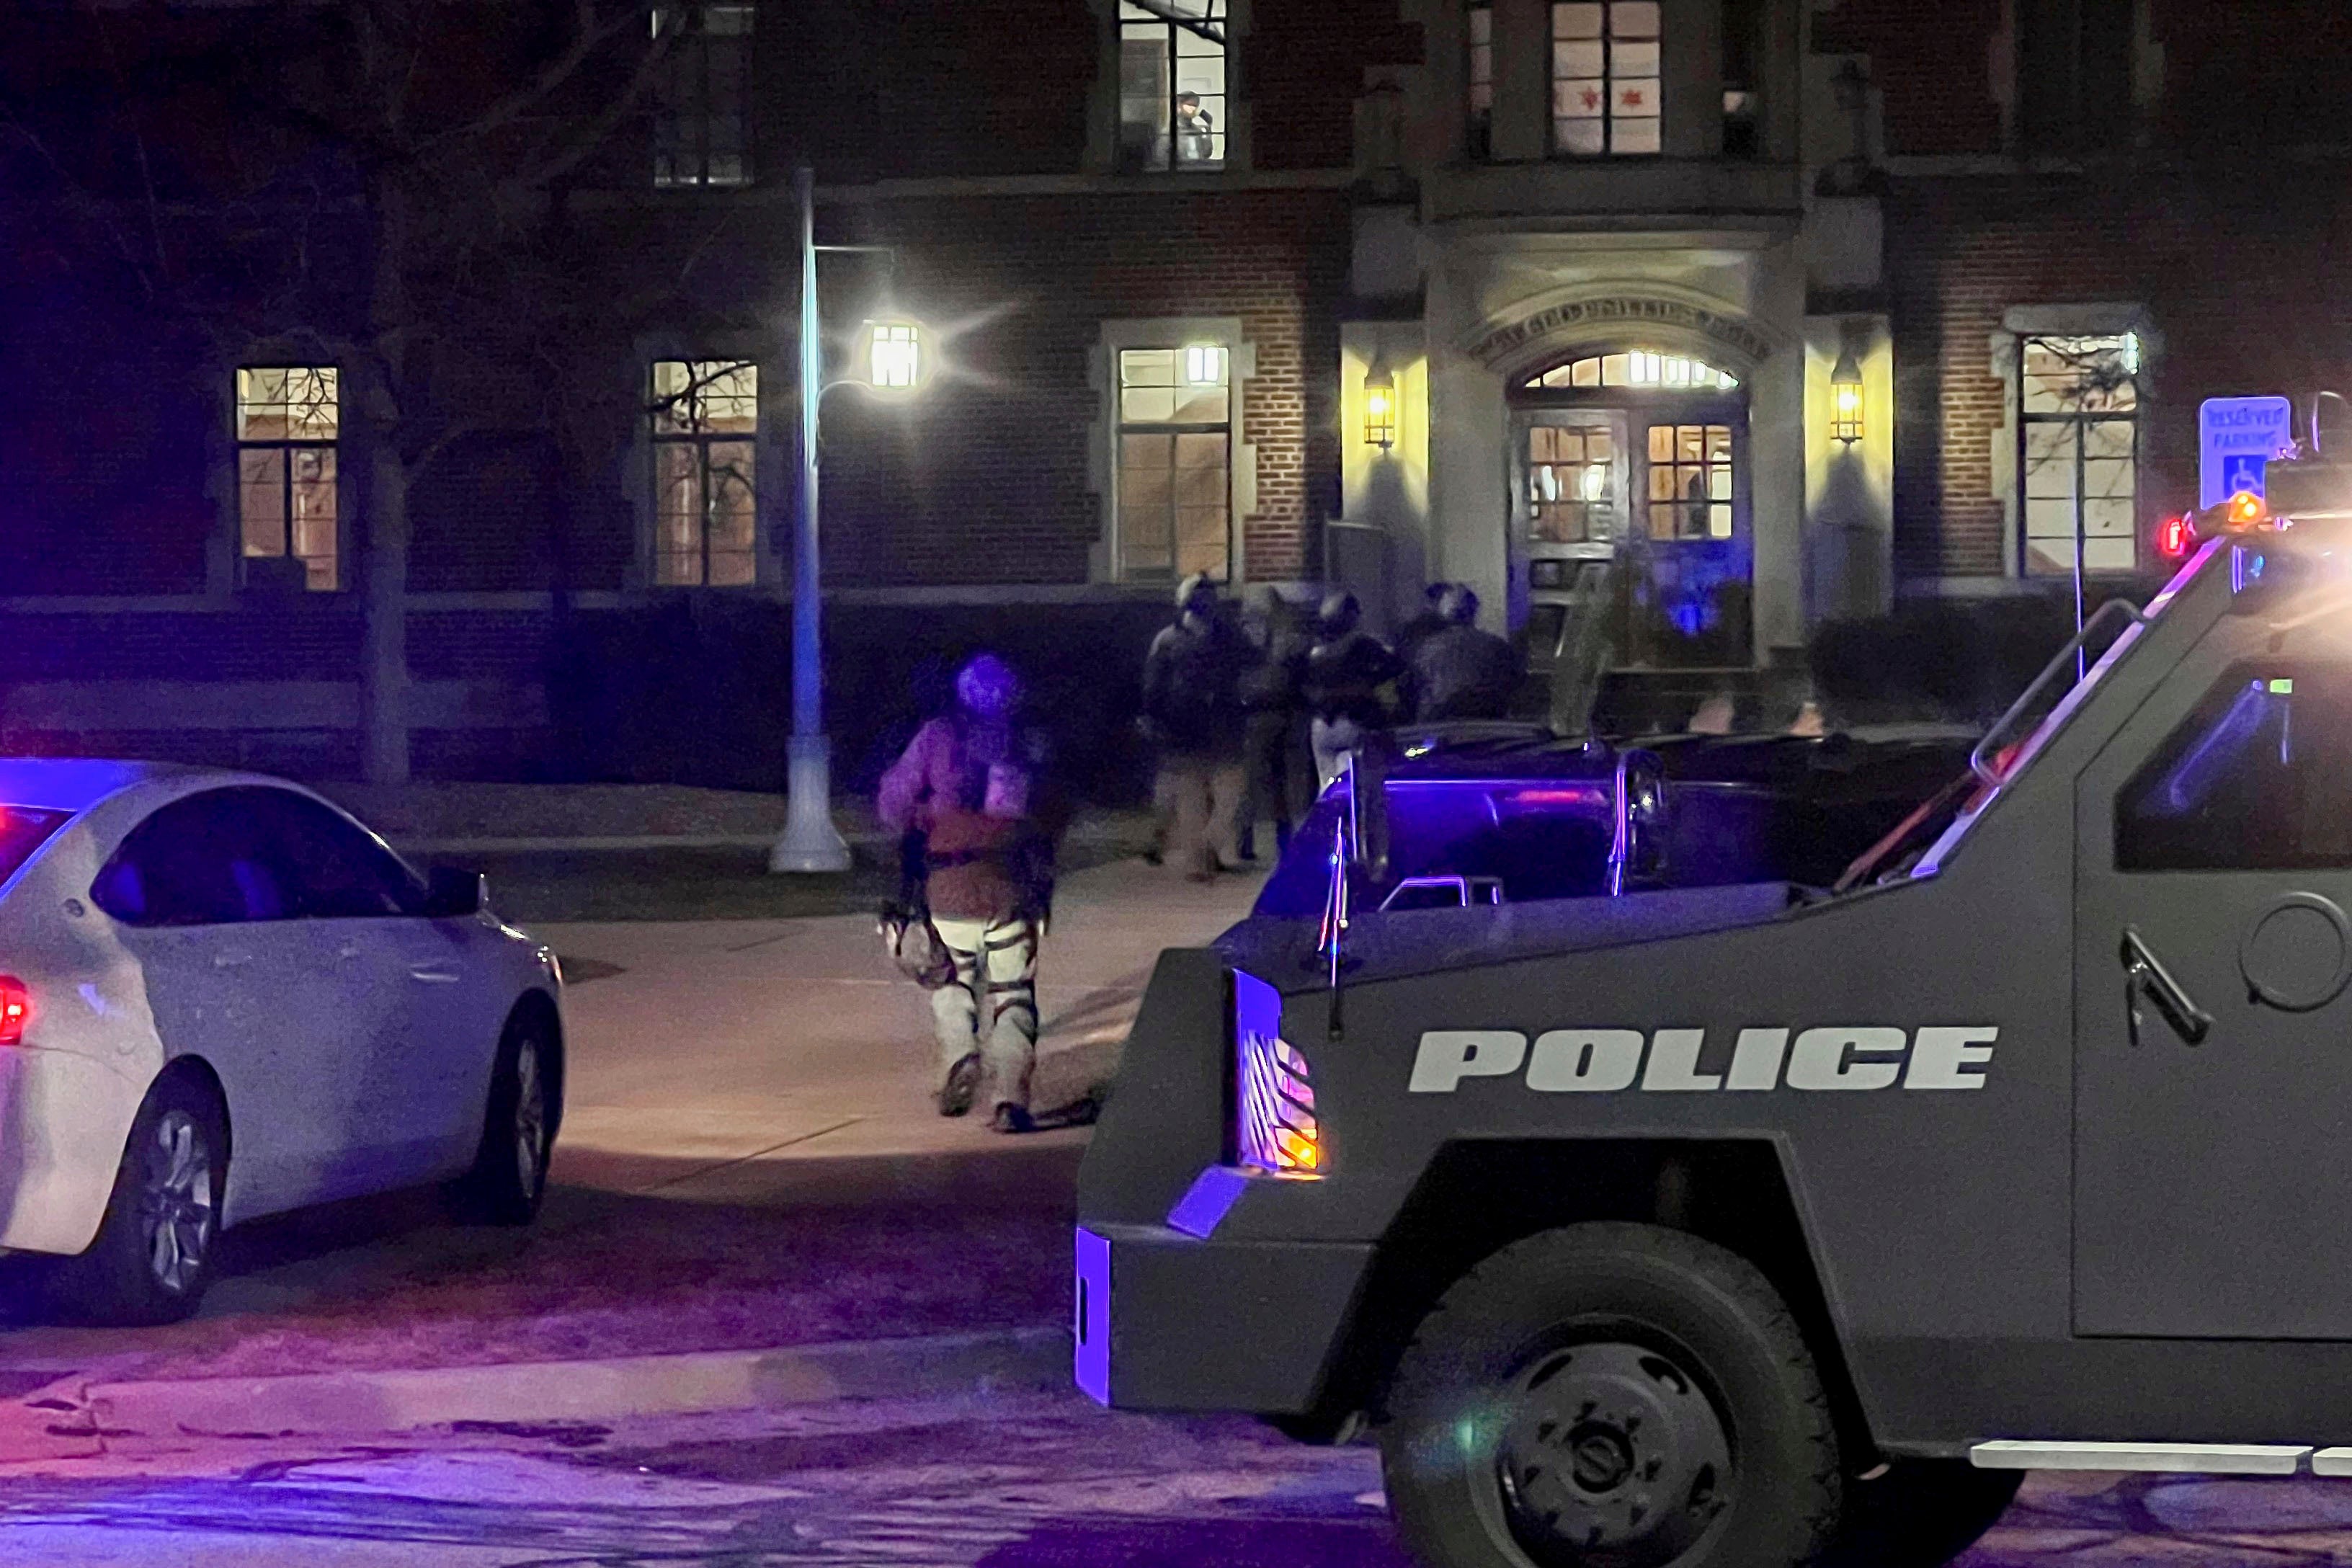 Armed police officers with weapons drawn rush into Phillips Hall on the campus of Michigan State University, in East Lansing, Michigan